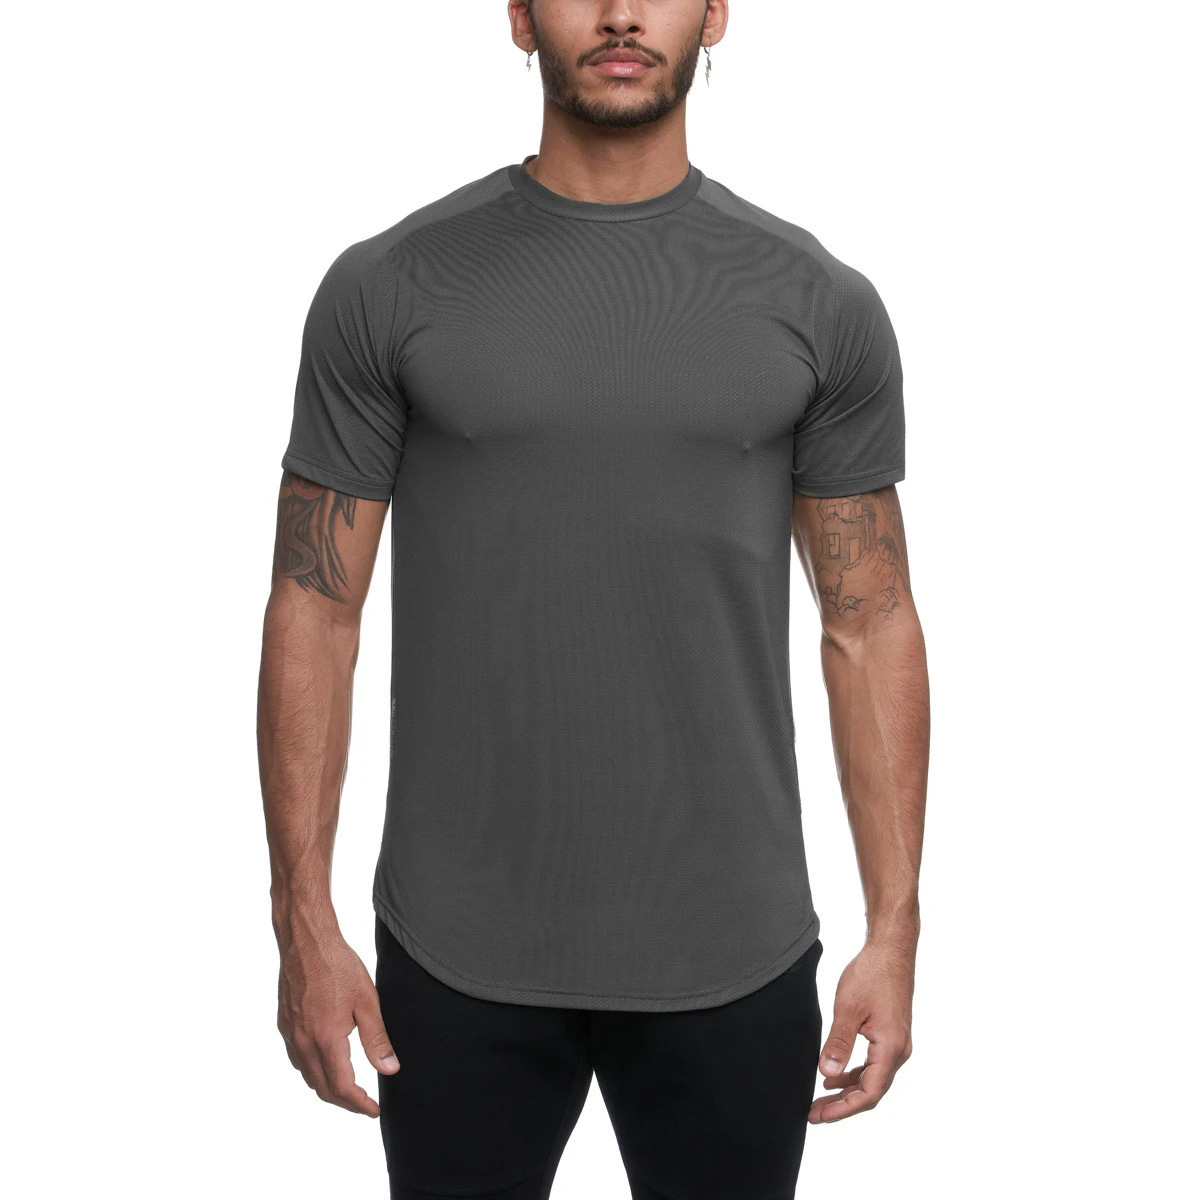 Men’s Workout Athletic T-Shirts Quick Dry Lightweight Muscle Shirts Casual Workout Tee 